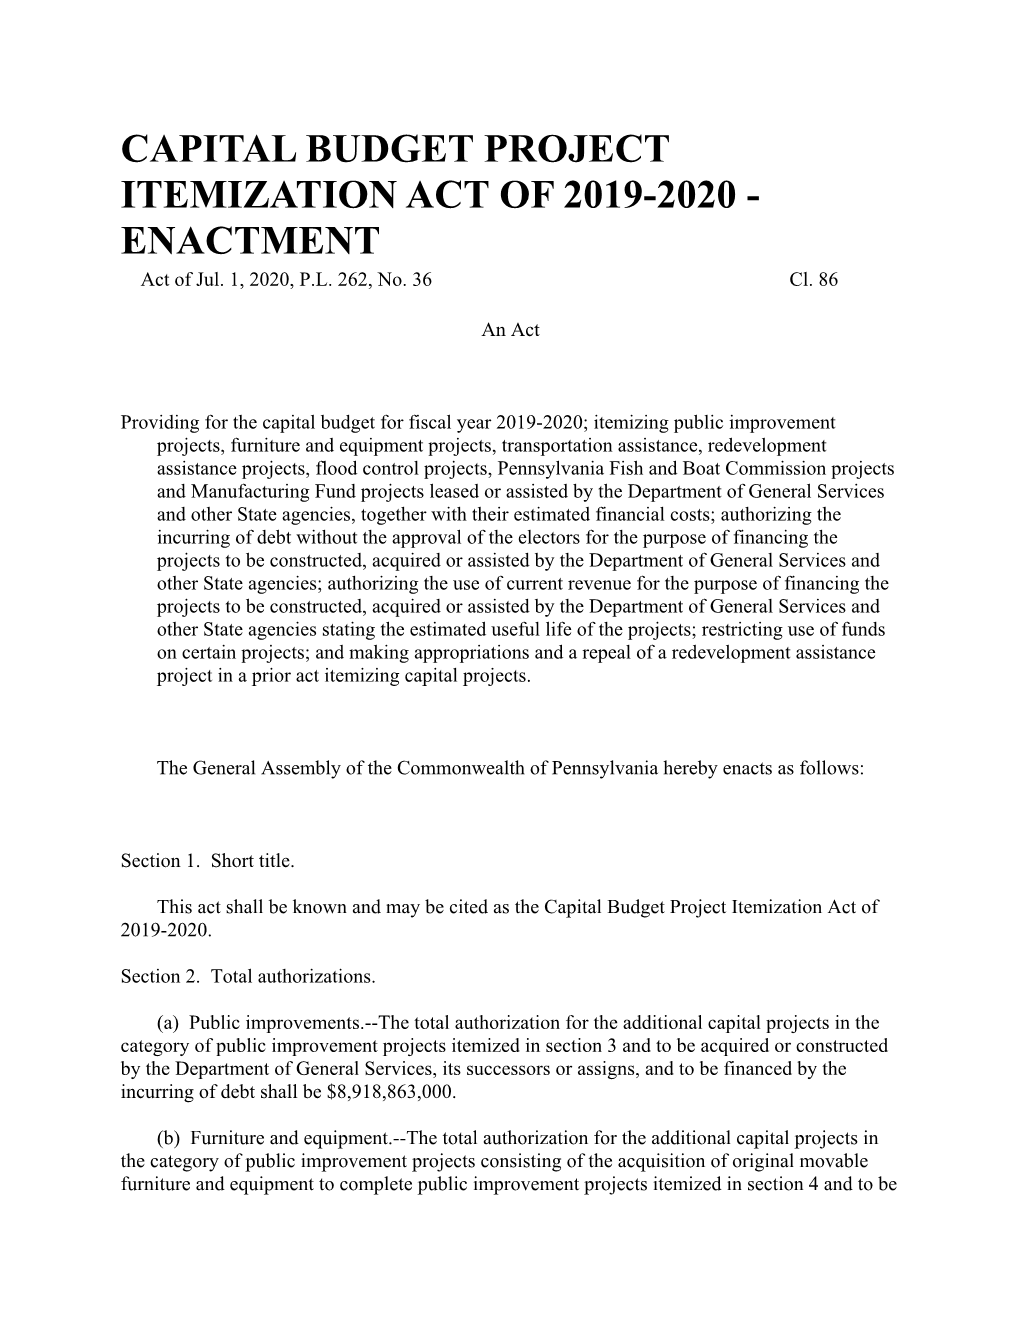 CAPITAL BUDGET PROJECT ITEMIZATION ACT of 2019-2020 - ENACTMENT Act of Jul